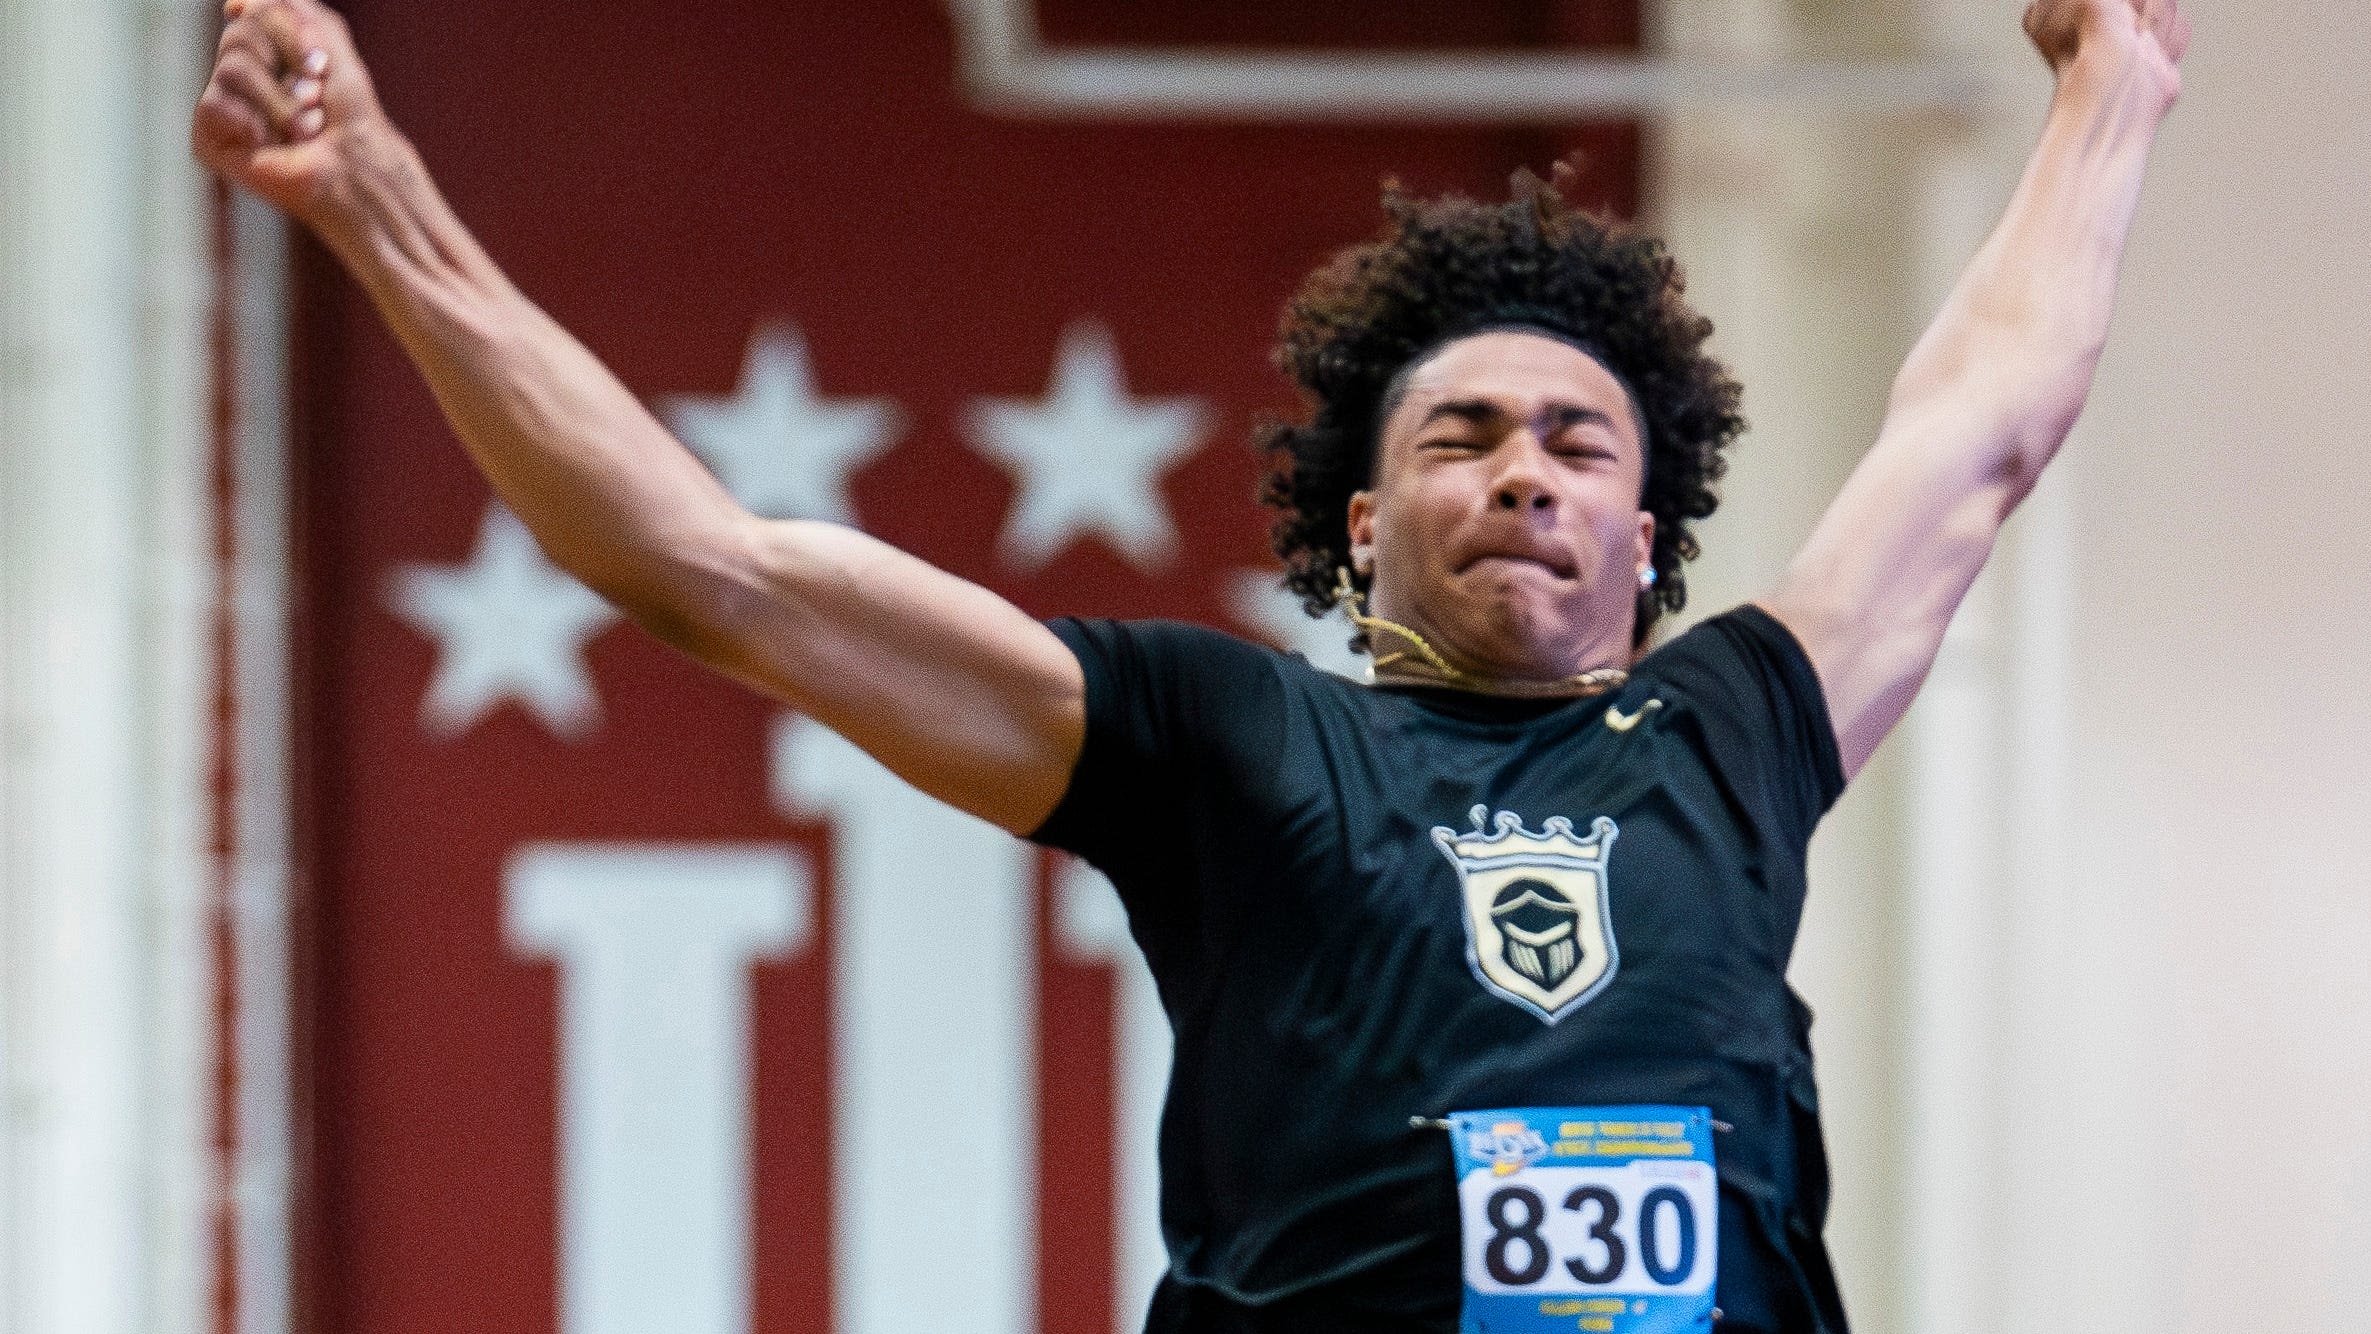 Penn's Elijah Coker moves indoor to win long jump state championship